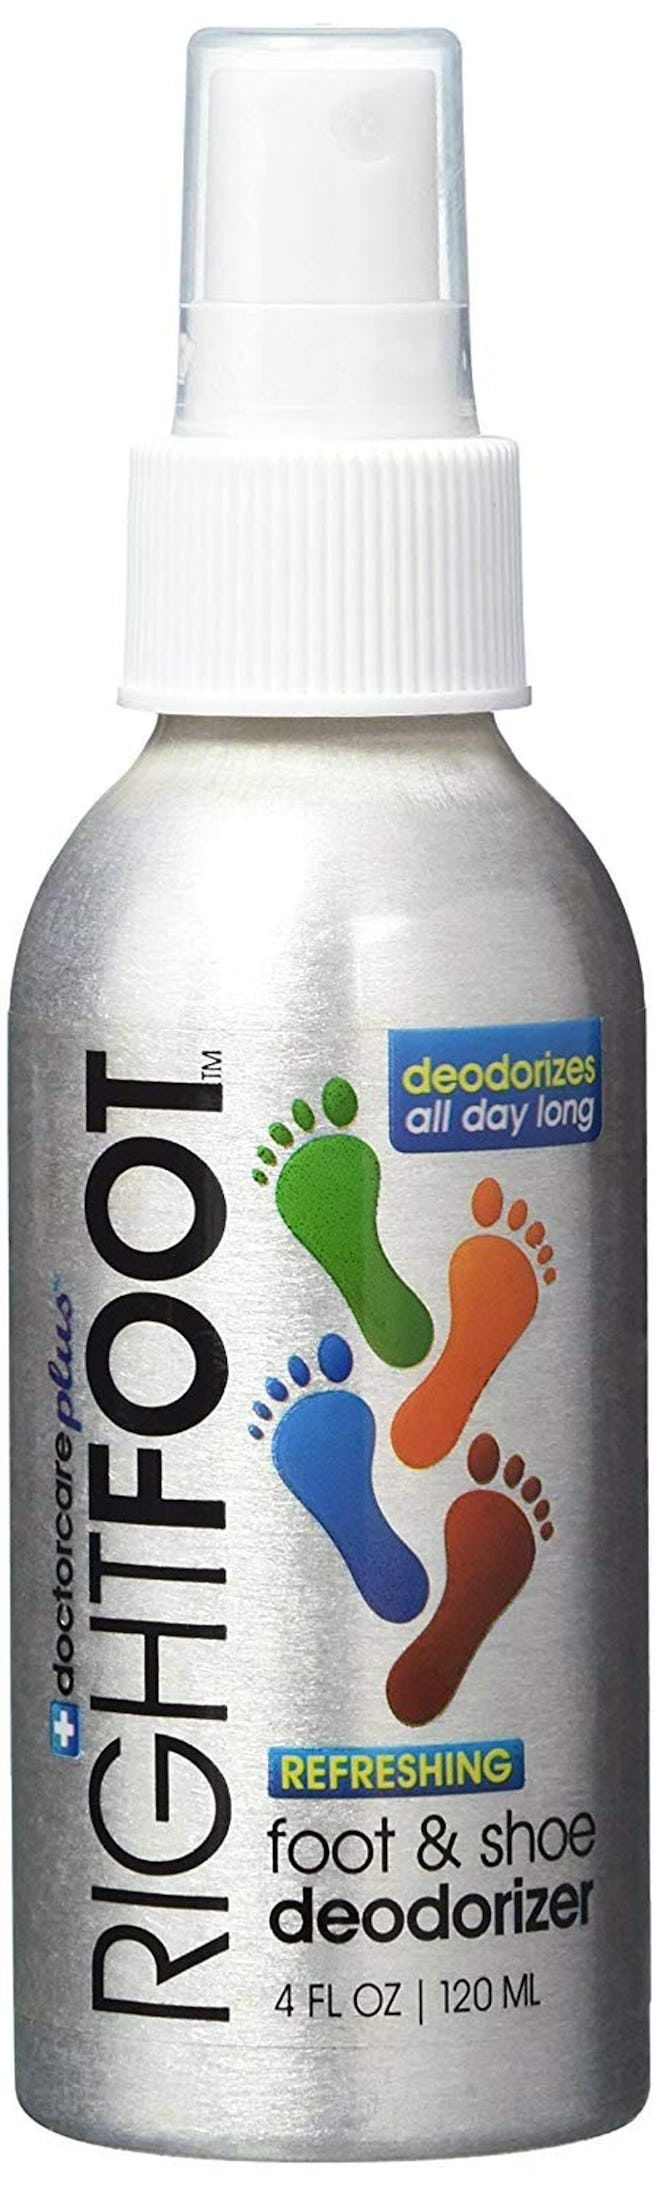 RIGHTFOOT Foot and Shoe Deodorizer Spray